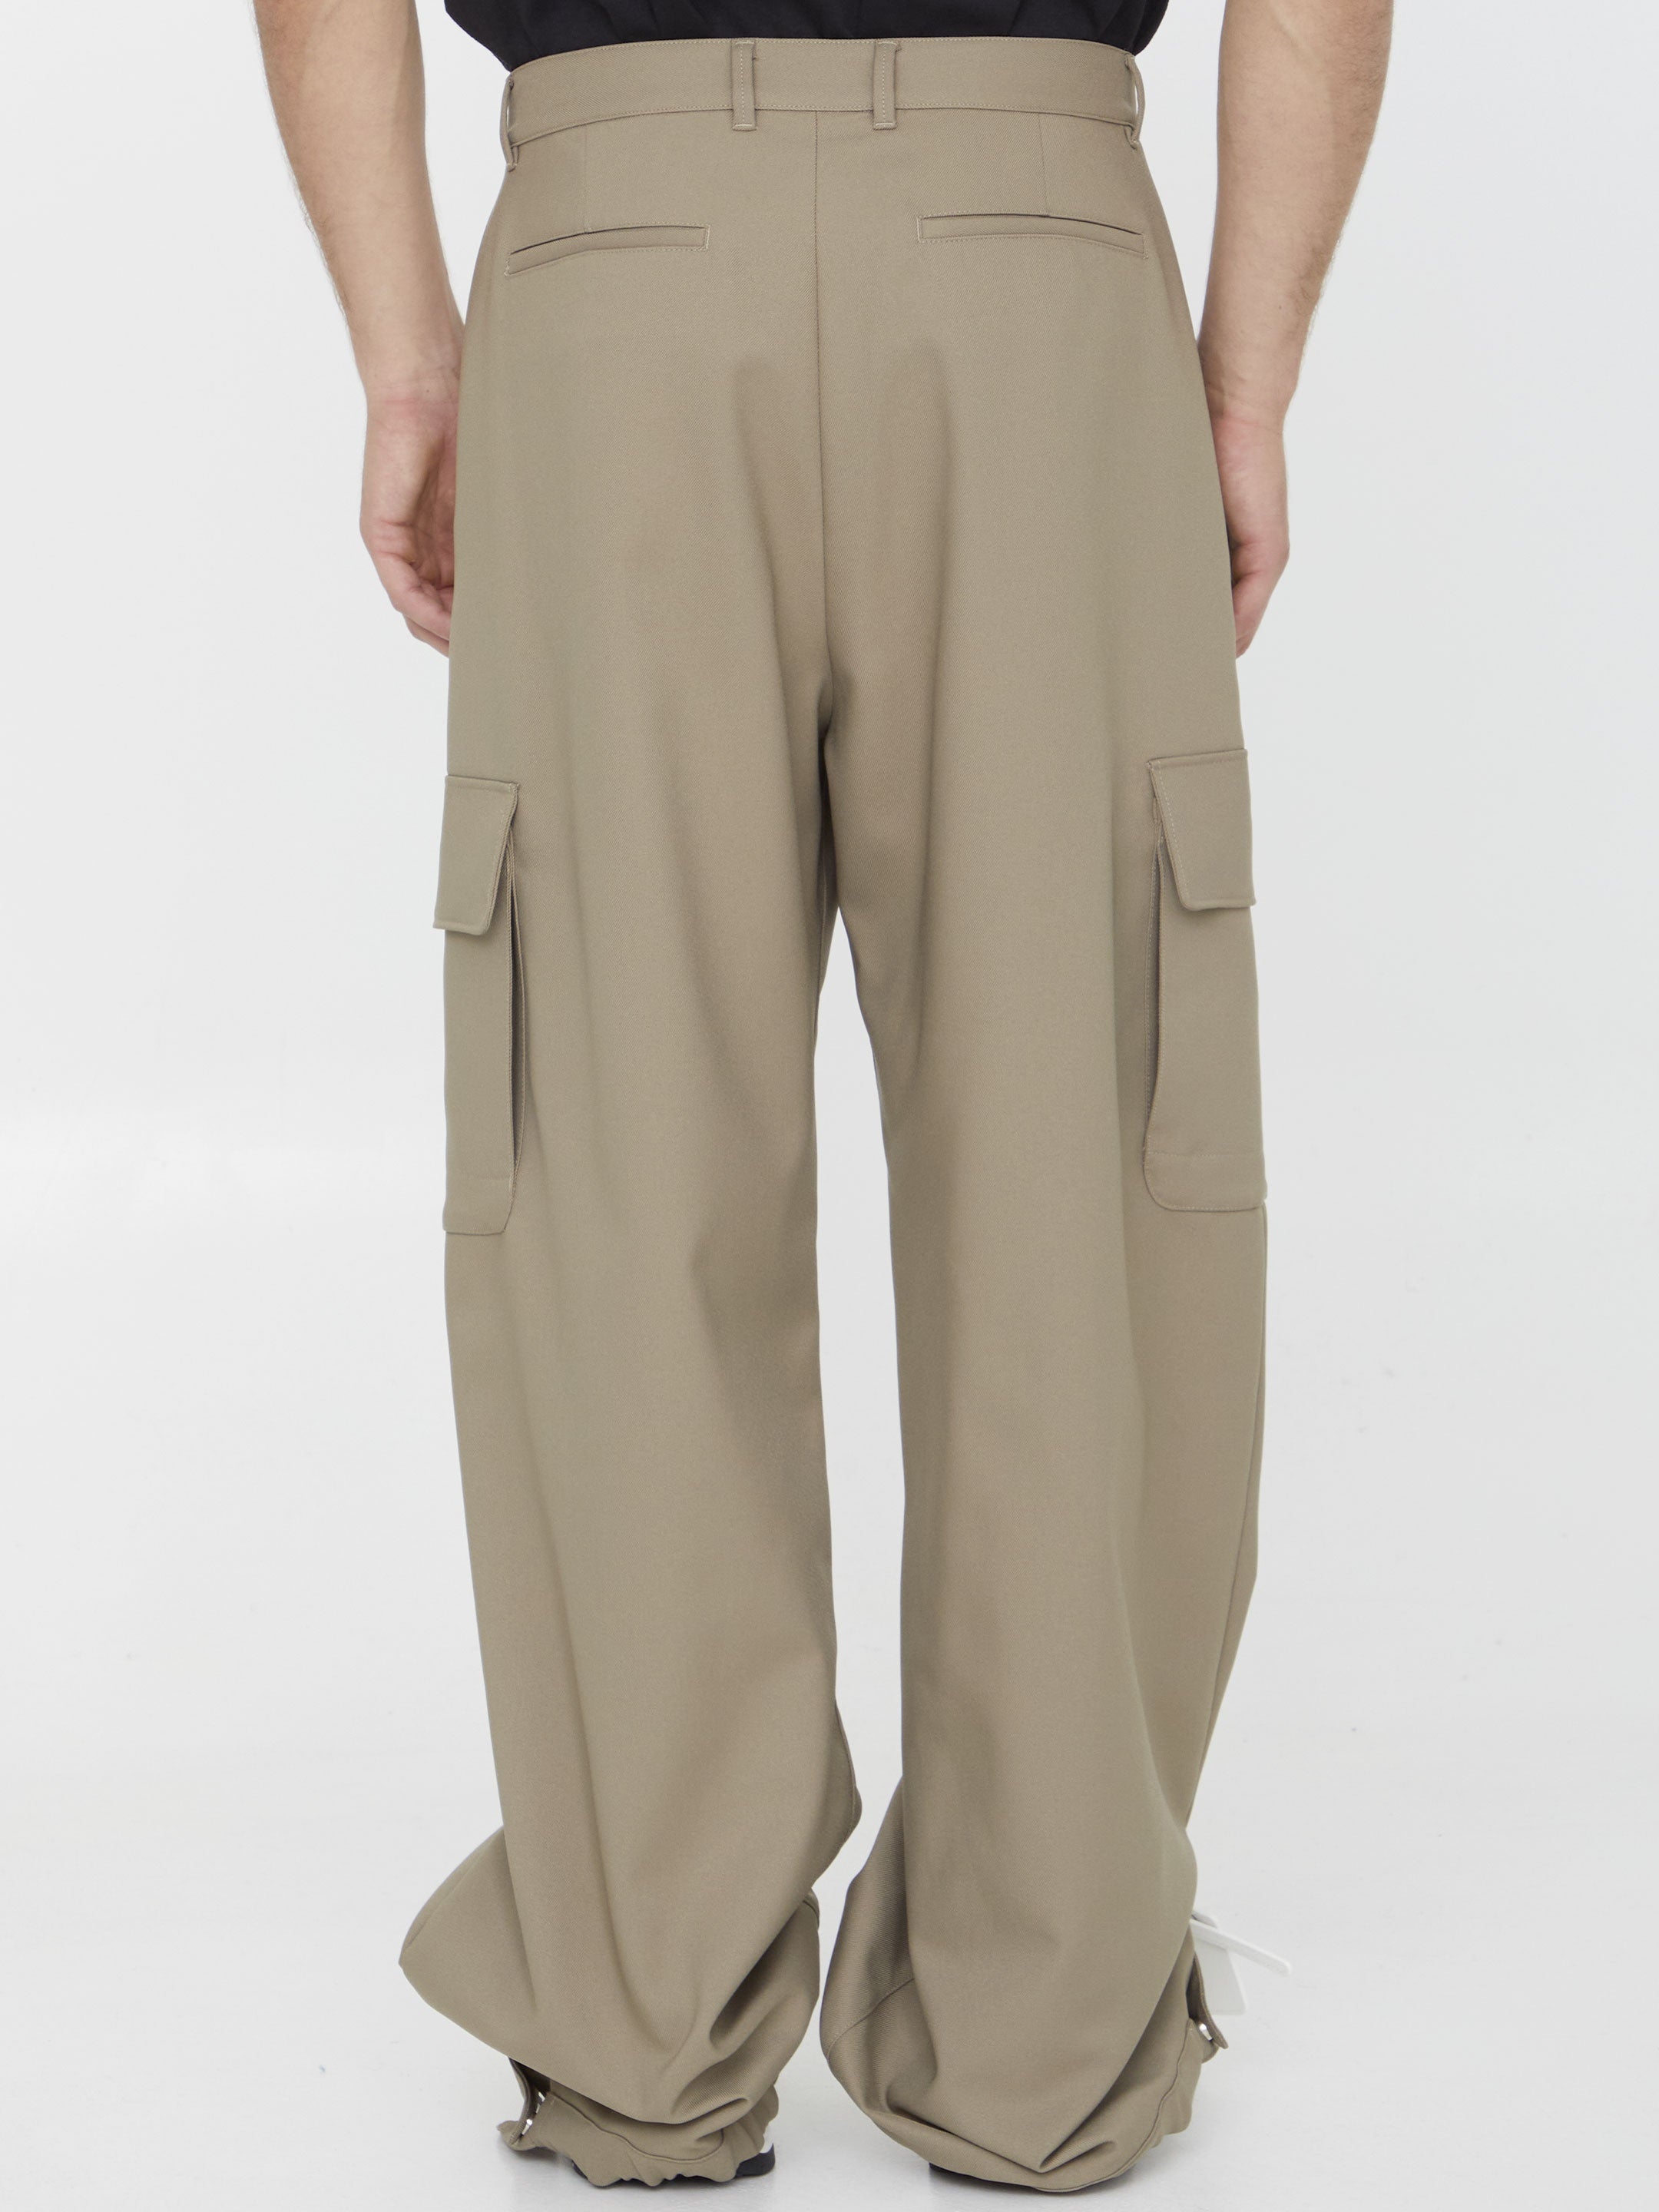 OFF-WHITE-OUTLET-SALE-OW-Emb-Drill-Cargo-pants-Hosen-ARCHIVE-COLLECTION-4.jpg